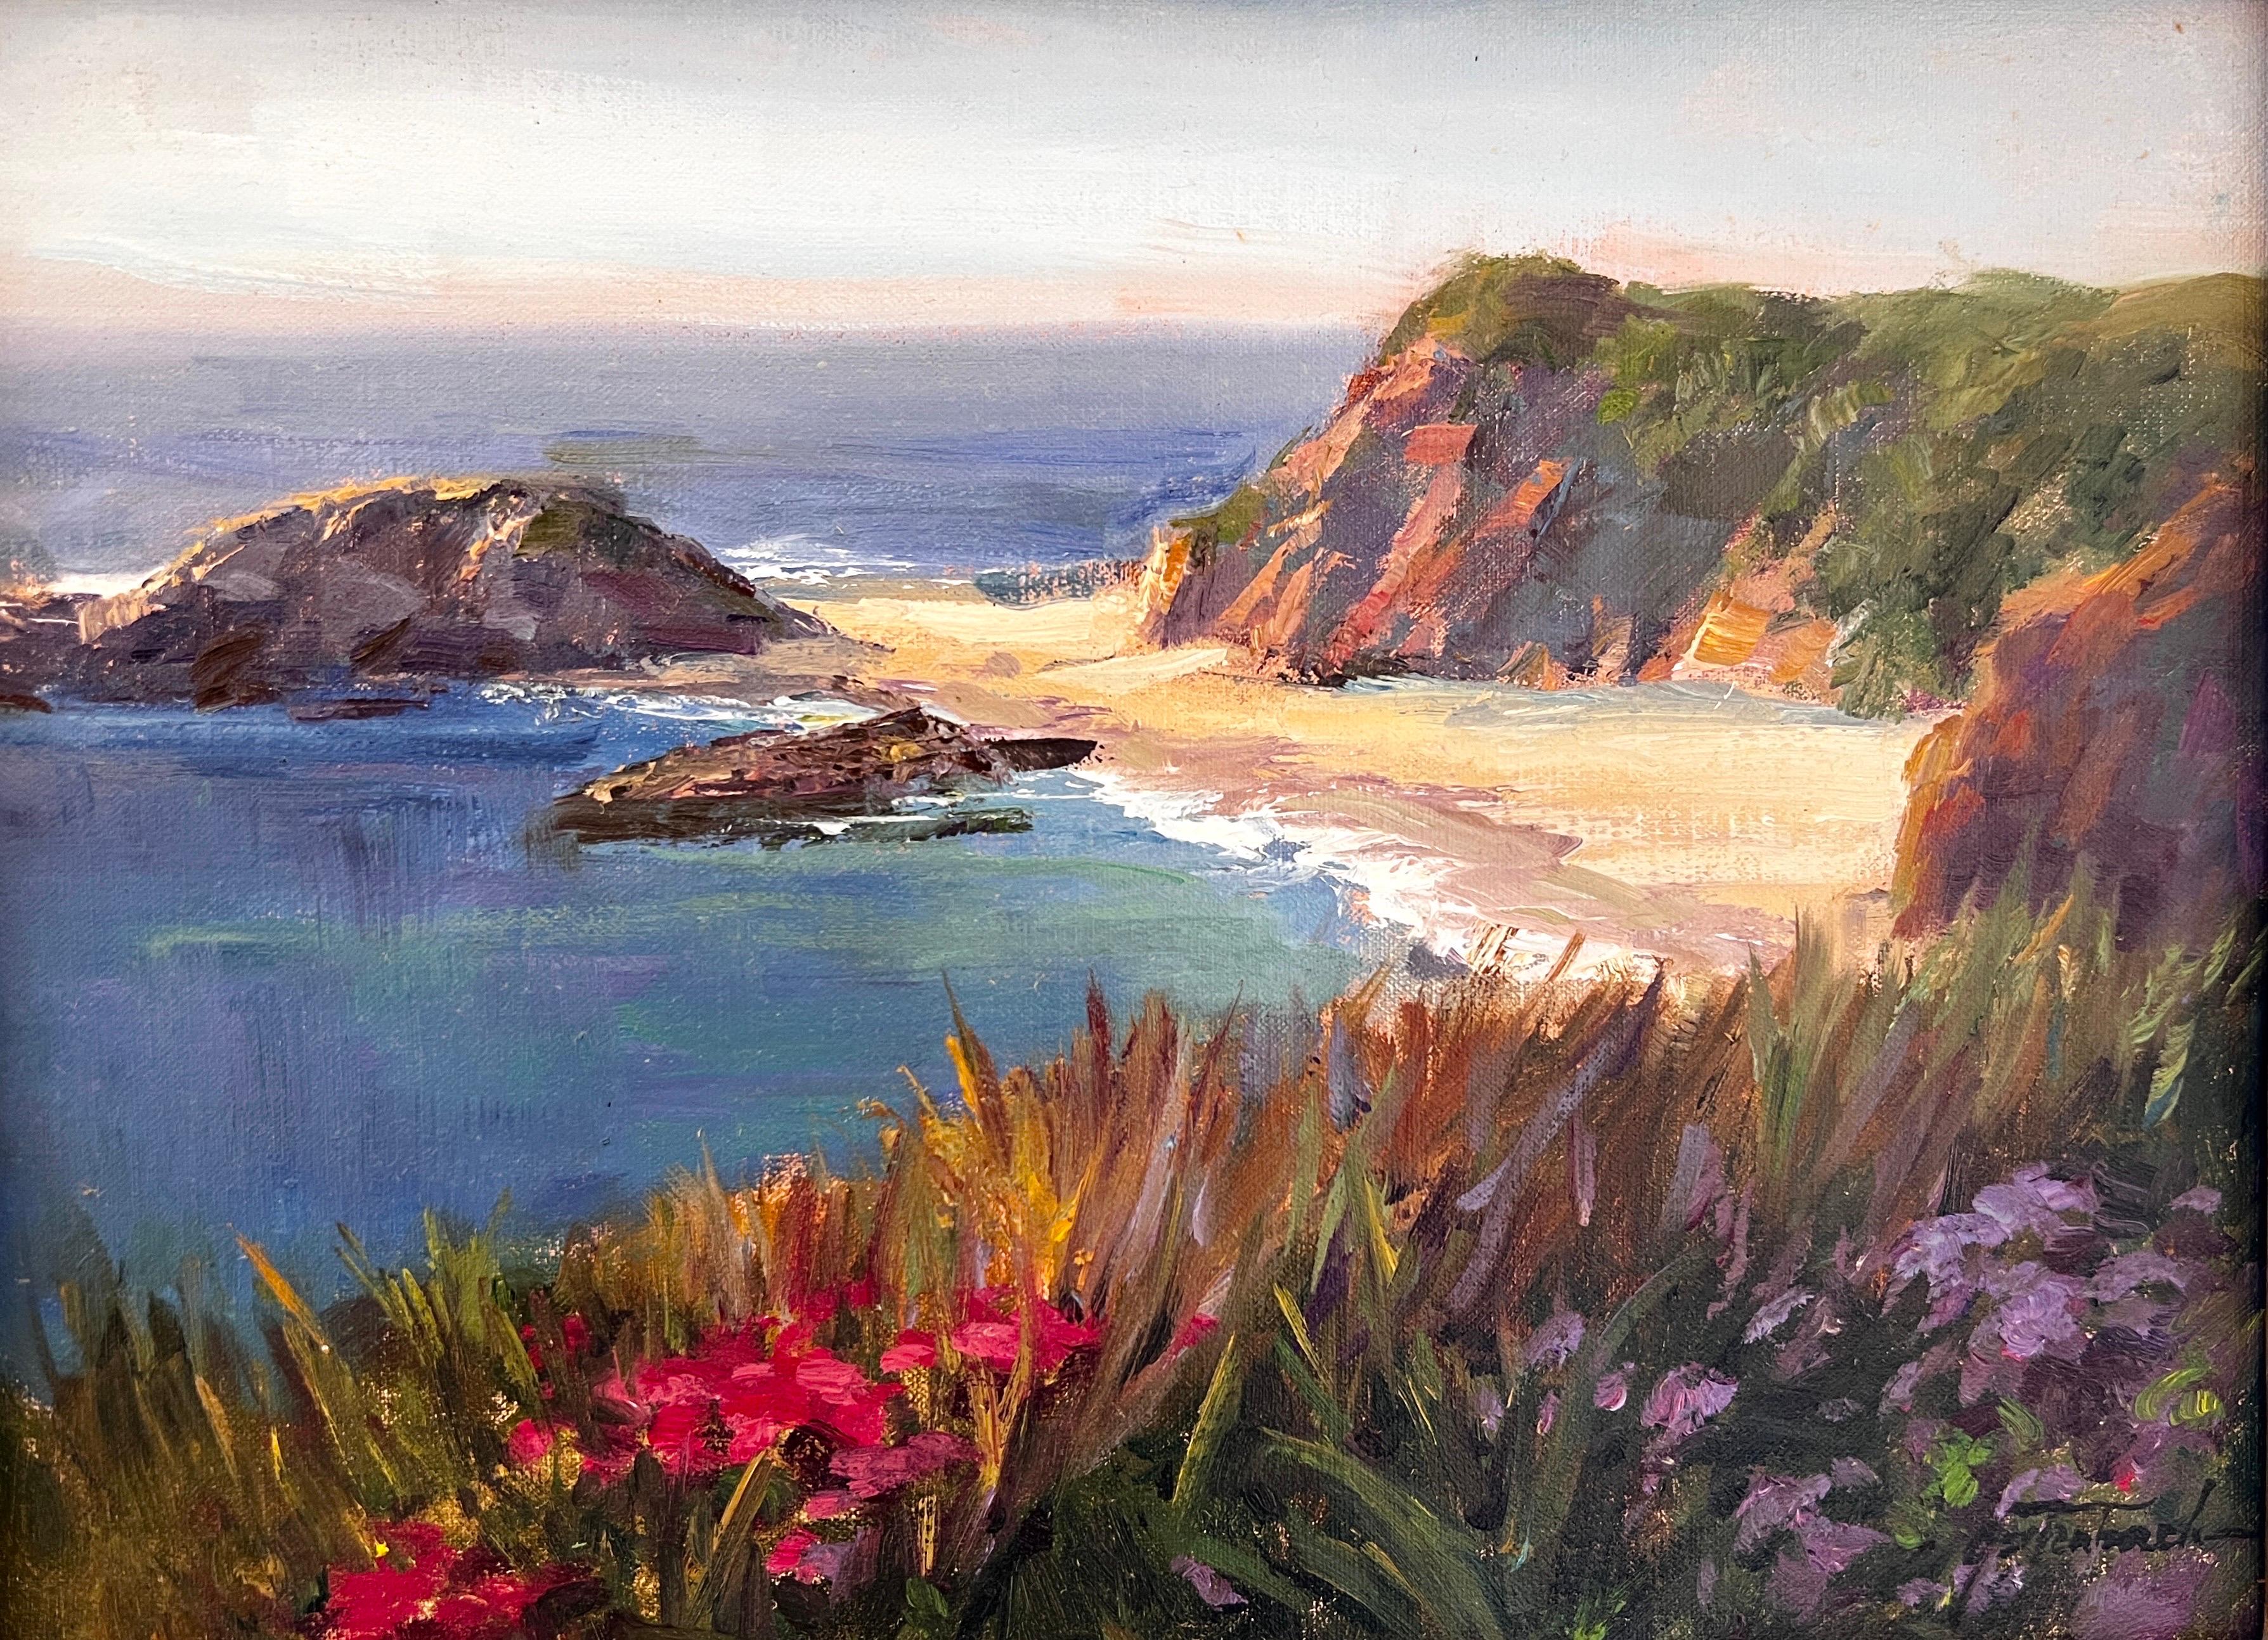 This exquisite painting captures the enchanting scenery of Montage, Laguna Beach, known to be one of the most inspiring locations for artists. The artwork, a testament to the late artist Lynn's talent, is a unique oil painting that evokes a sense of